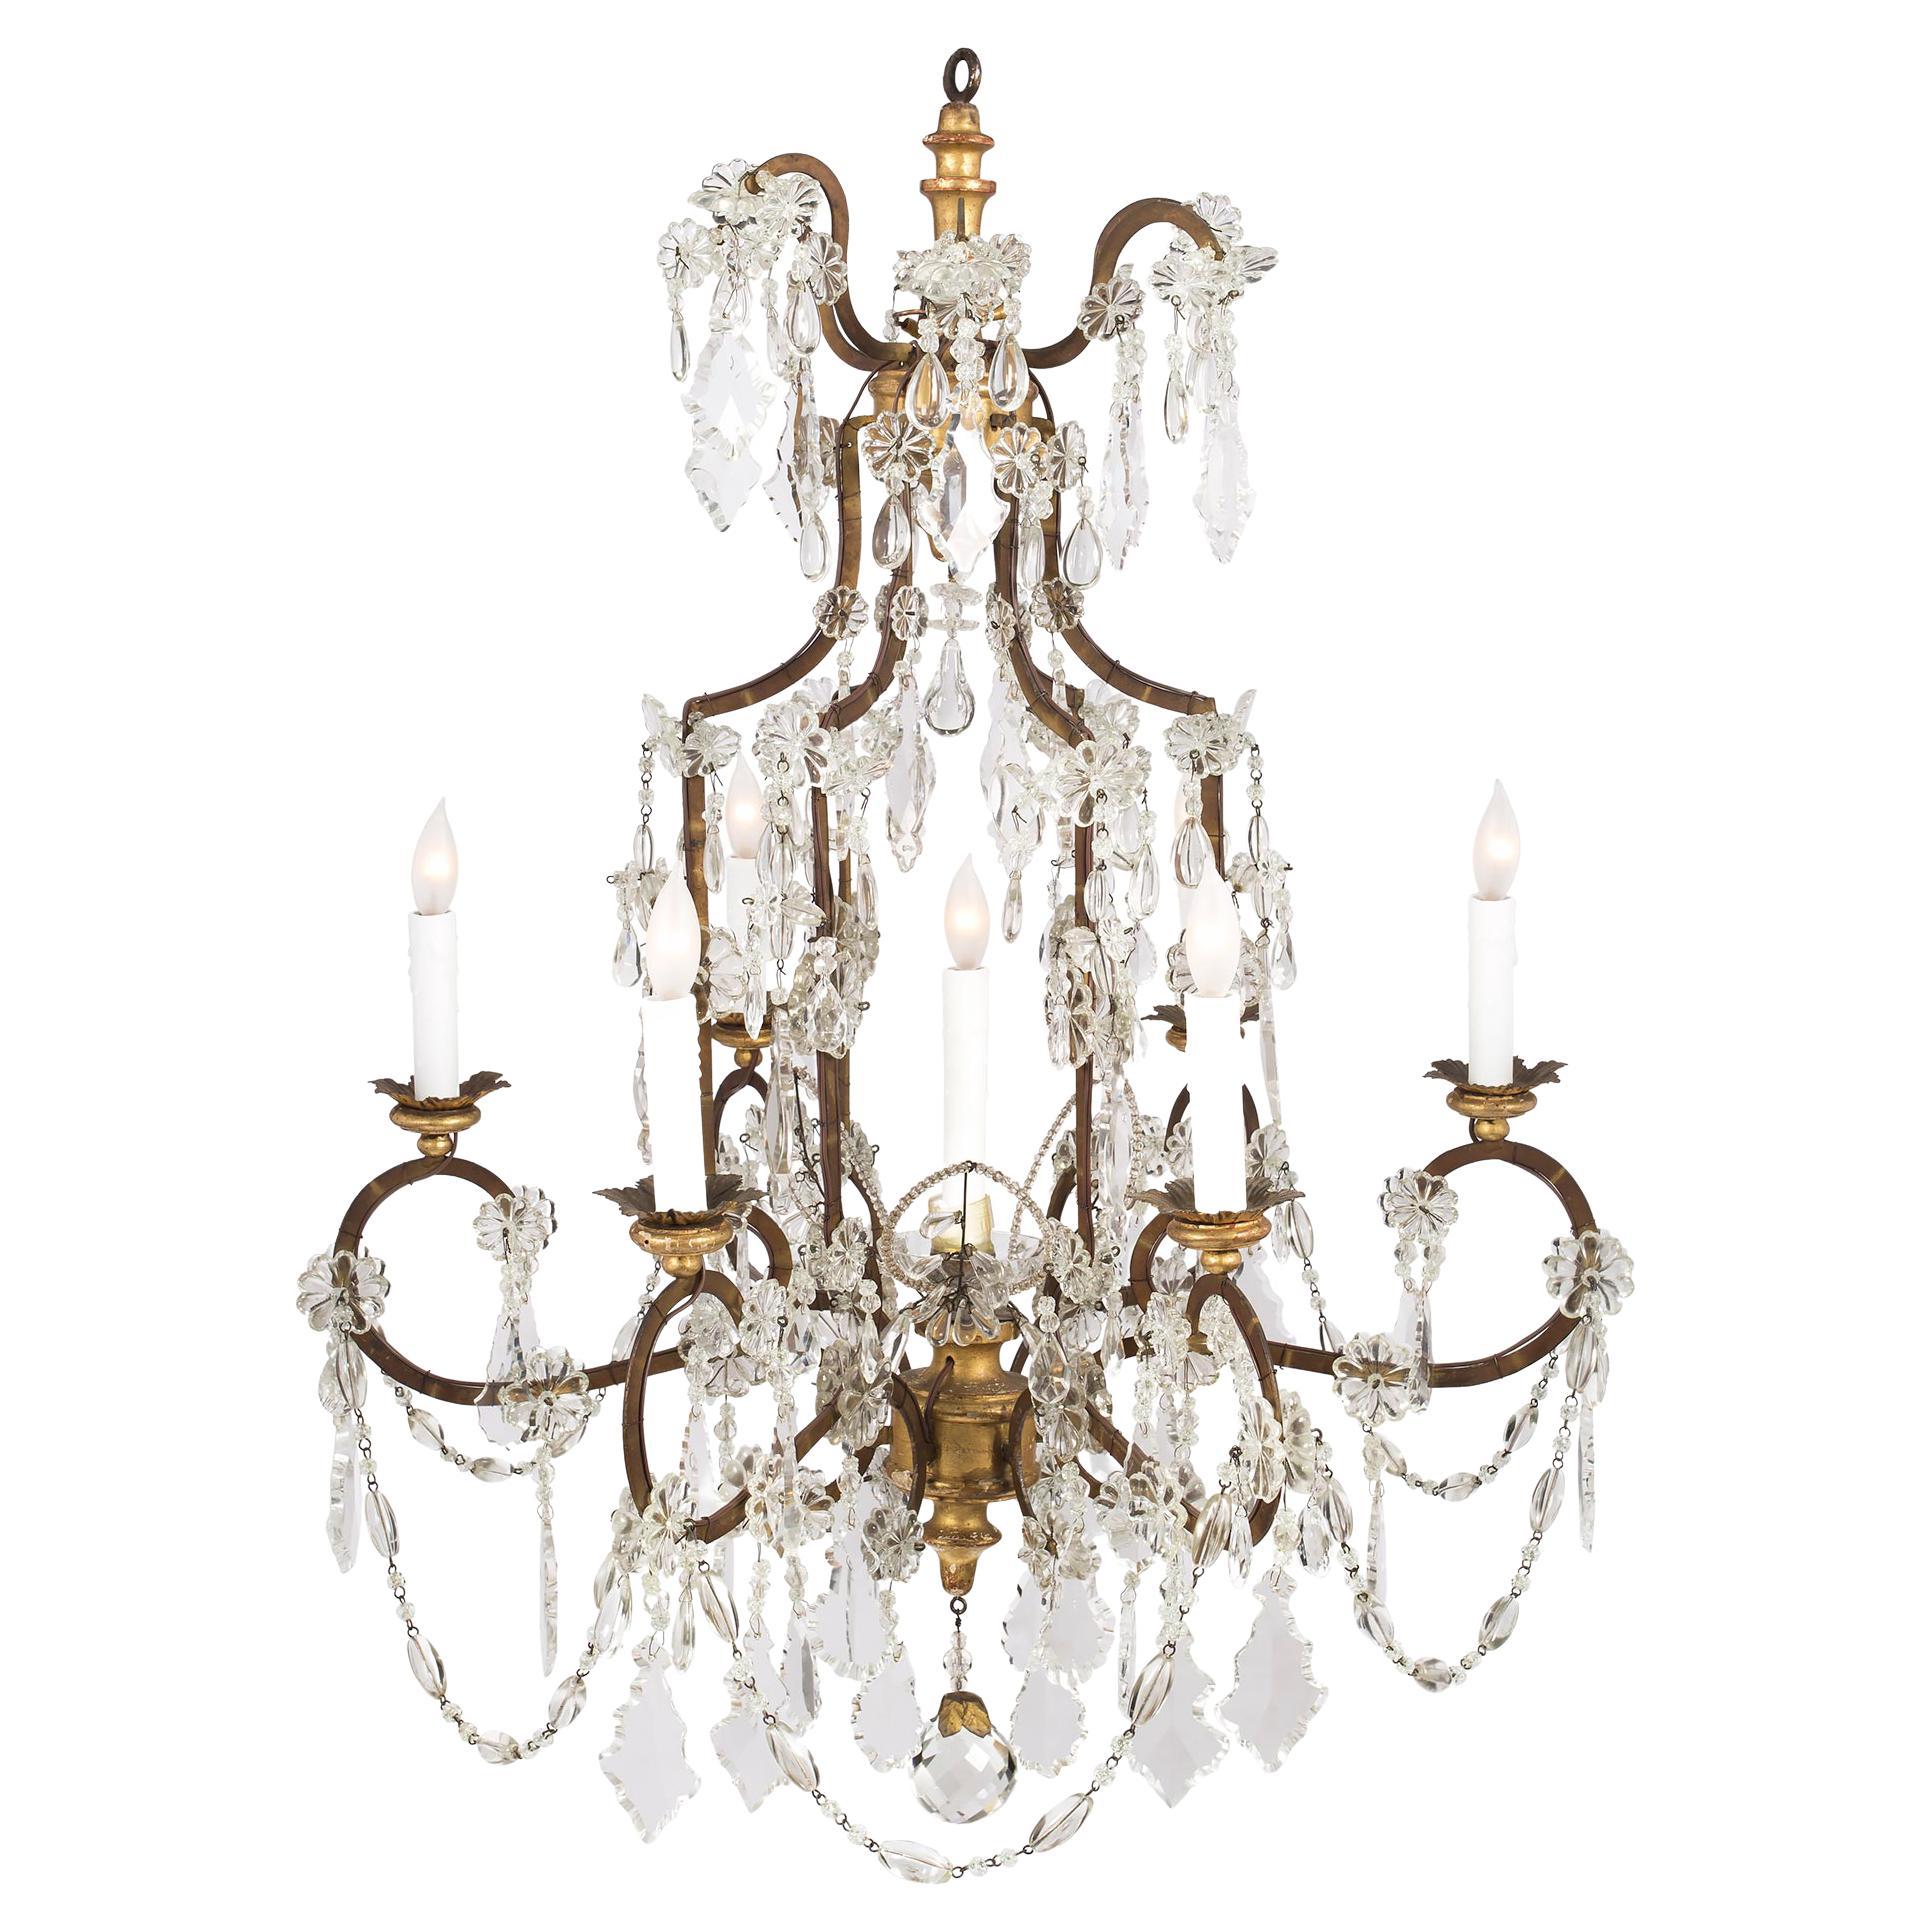 Italian 19th Century Giltwood And Crystal Chandelier